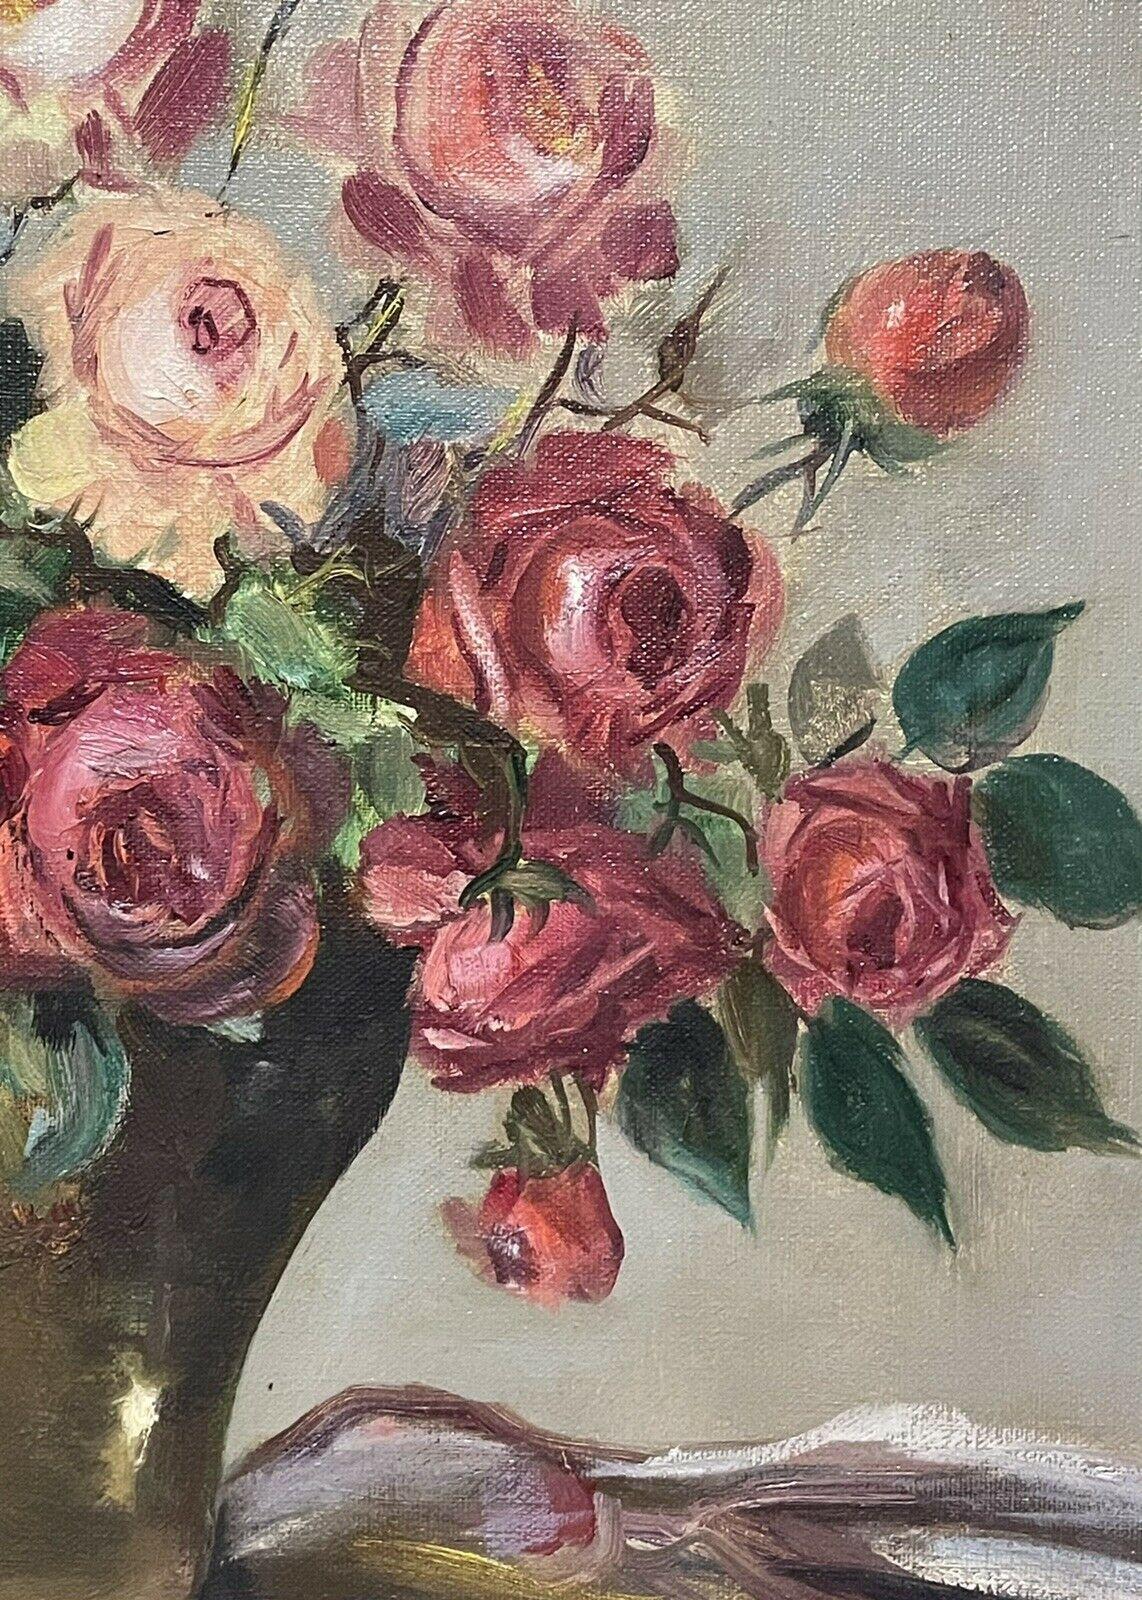 VINTAGE ENGLISH STILL LIFE OIL PAINTING - ROSES IN VASE - ORIGINAL SHABBY CHIC - Brown Still-Life Painting by Unknown